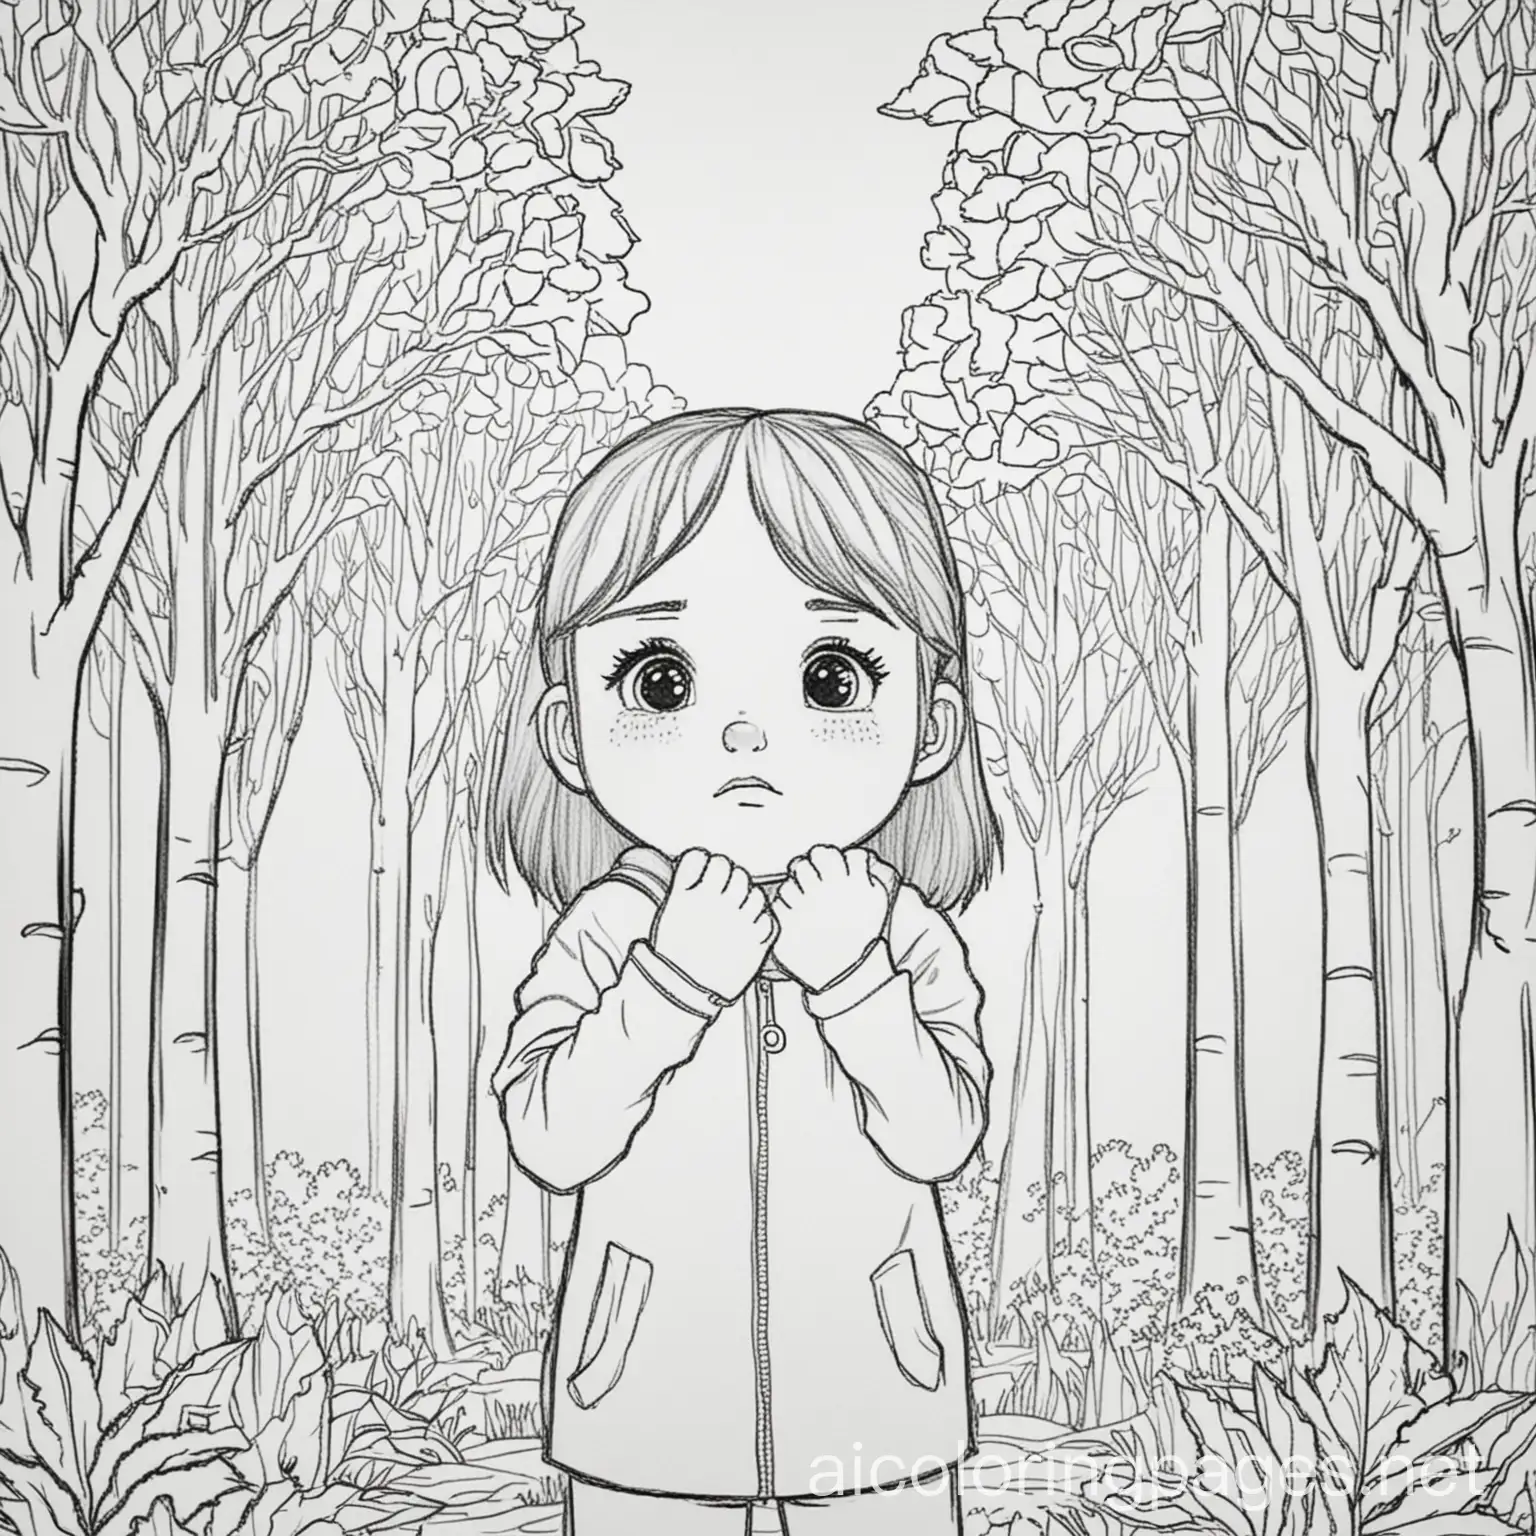 A girl standing with her fists up to her eyes crying. With trees to colour in behind her. Coloring Page, black and white, line art, white background, Simplicity, Ample White Space. The background of the coloring page is plain white to make it easy for young children to color within the lines. The outlines of all the subjects are easy to distinguish, making it simple for kids to color without too much difficulty, Coloring Page, black and white, line art, white background, Simplicity, Ample White Space. The background of the coloring page is plain white to make it easy for young children to color within the lines. The outlines of all the subjects are easy to distinguish, making it simple for kids to color without too much difficulty